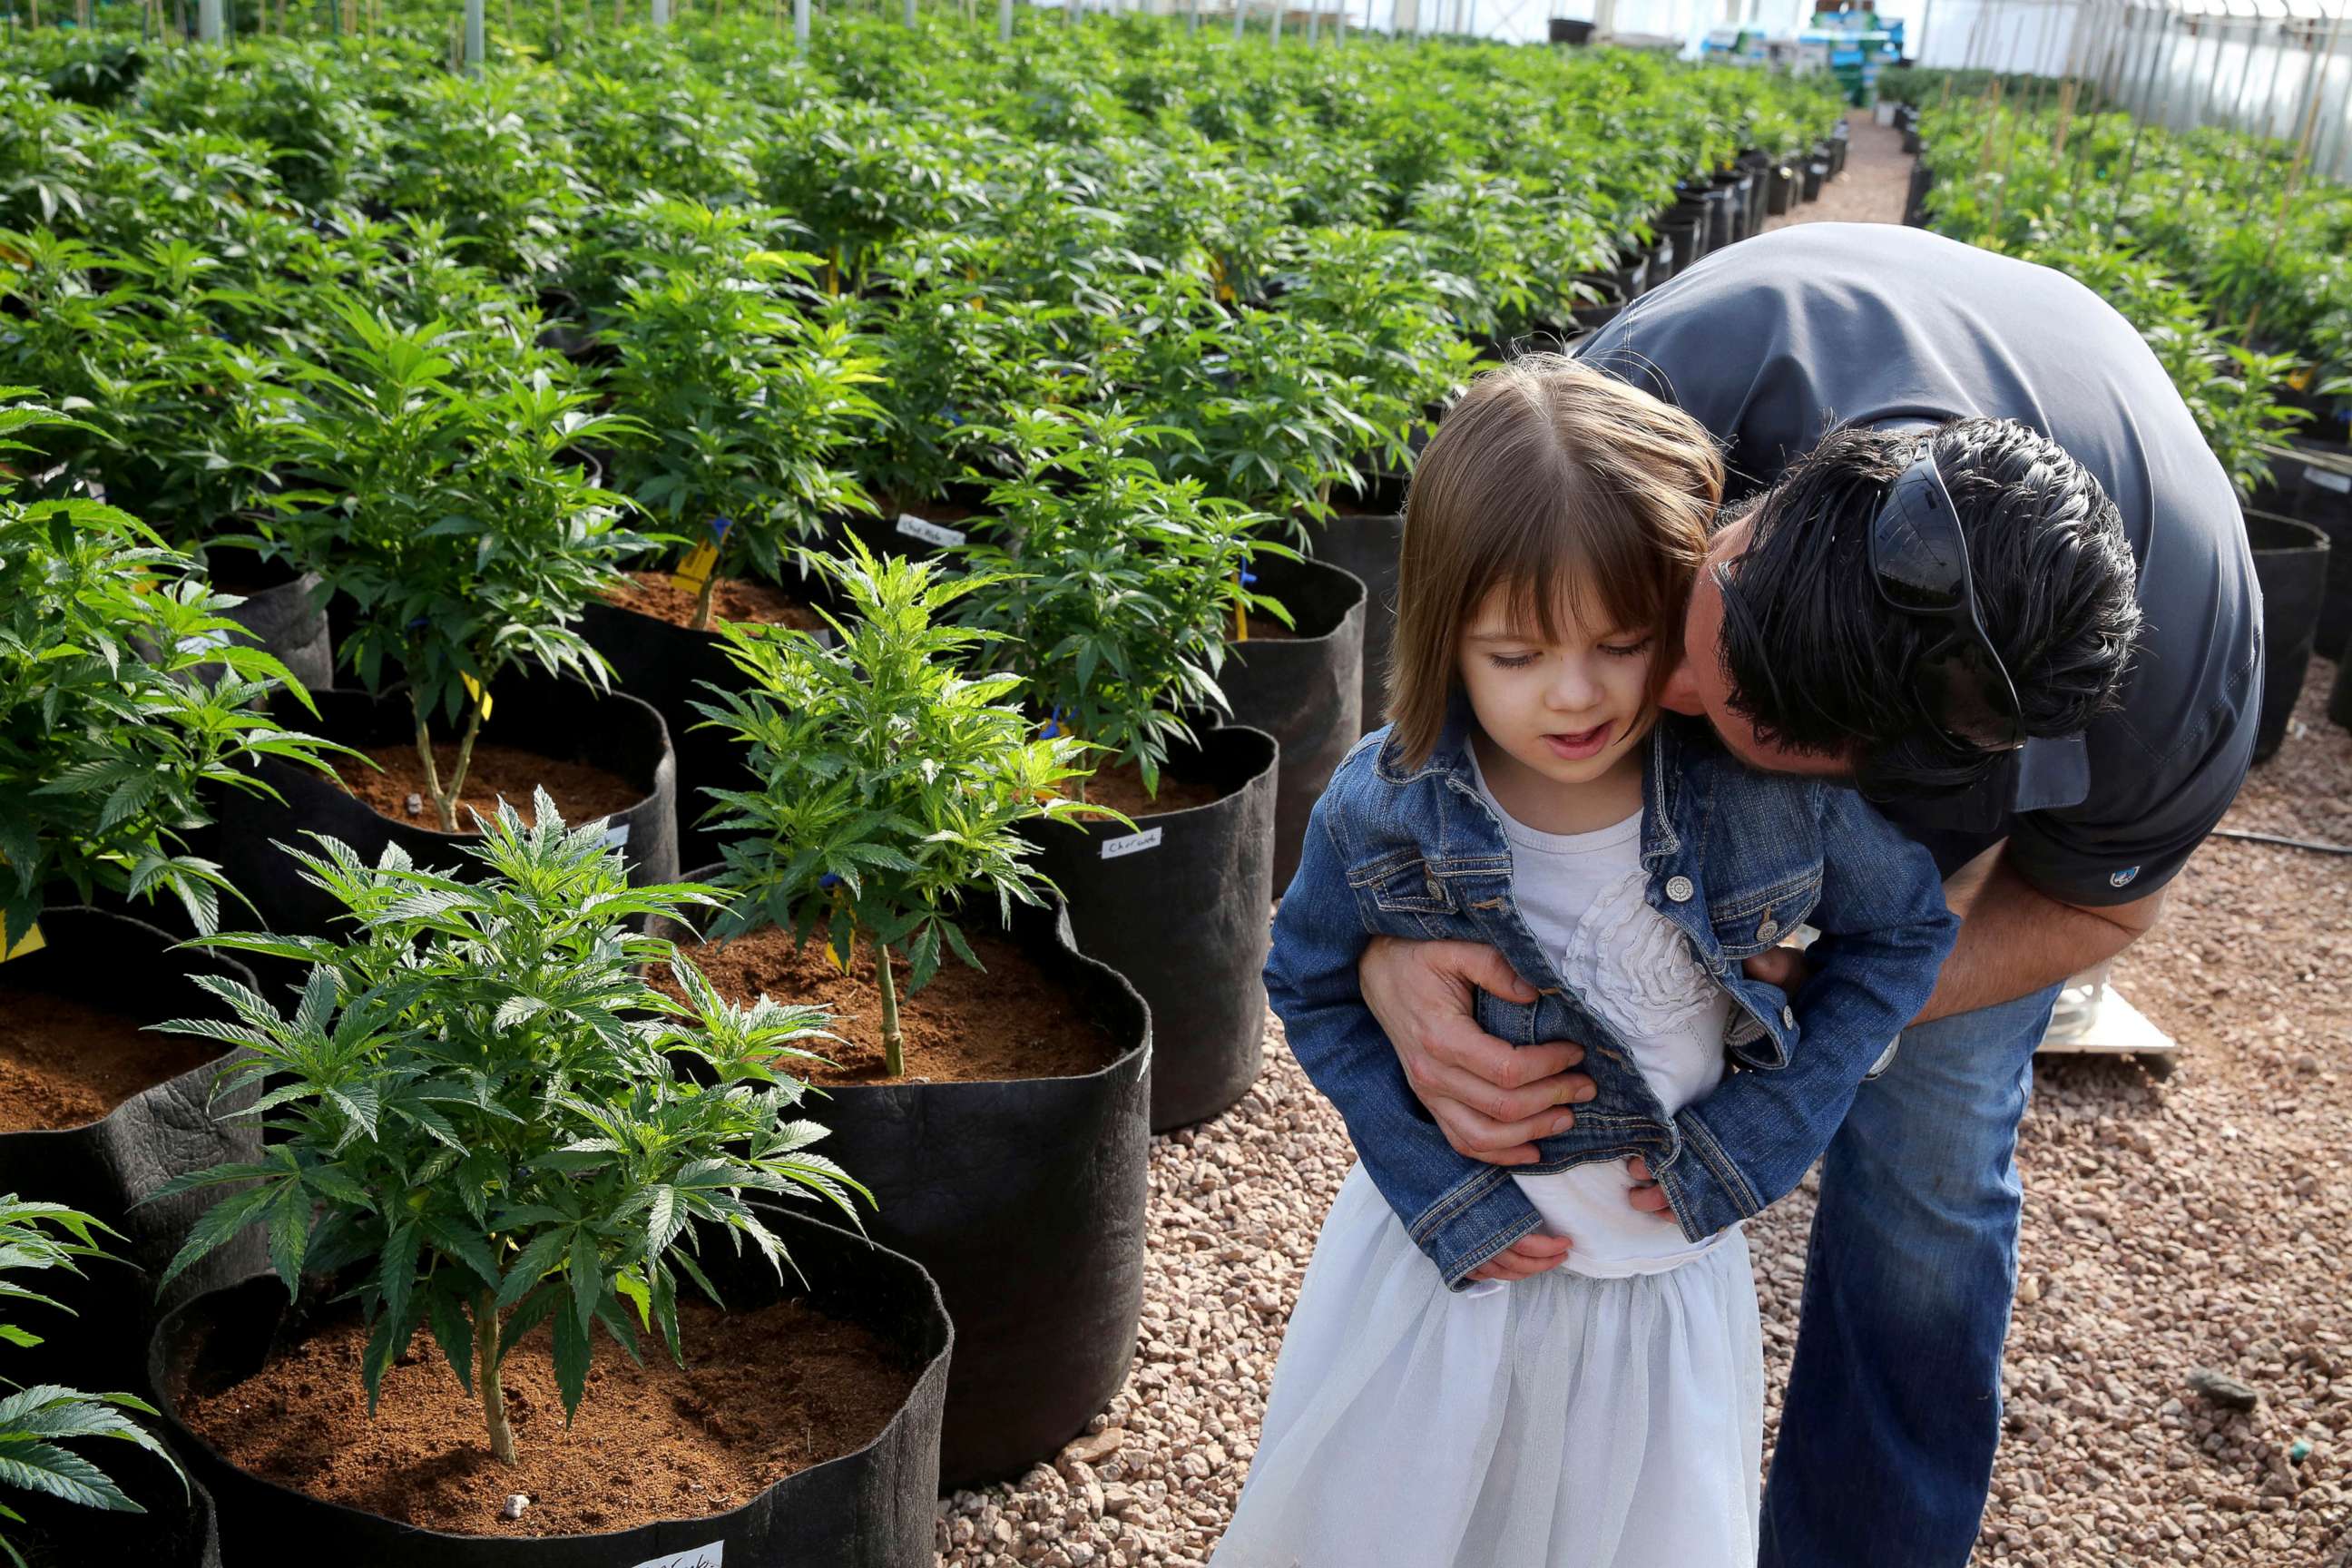 PHOTO: Matt Figi hugs his daughter Charlotte as they walk around inside a greenhouse for a special strain of medical marijuana known as Charlotte's Web at a grow location in a remote spot in the mountains west of Colorado Springs, Colo.